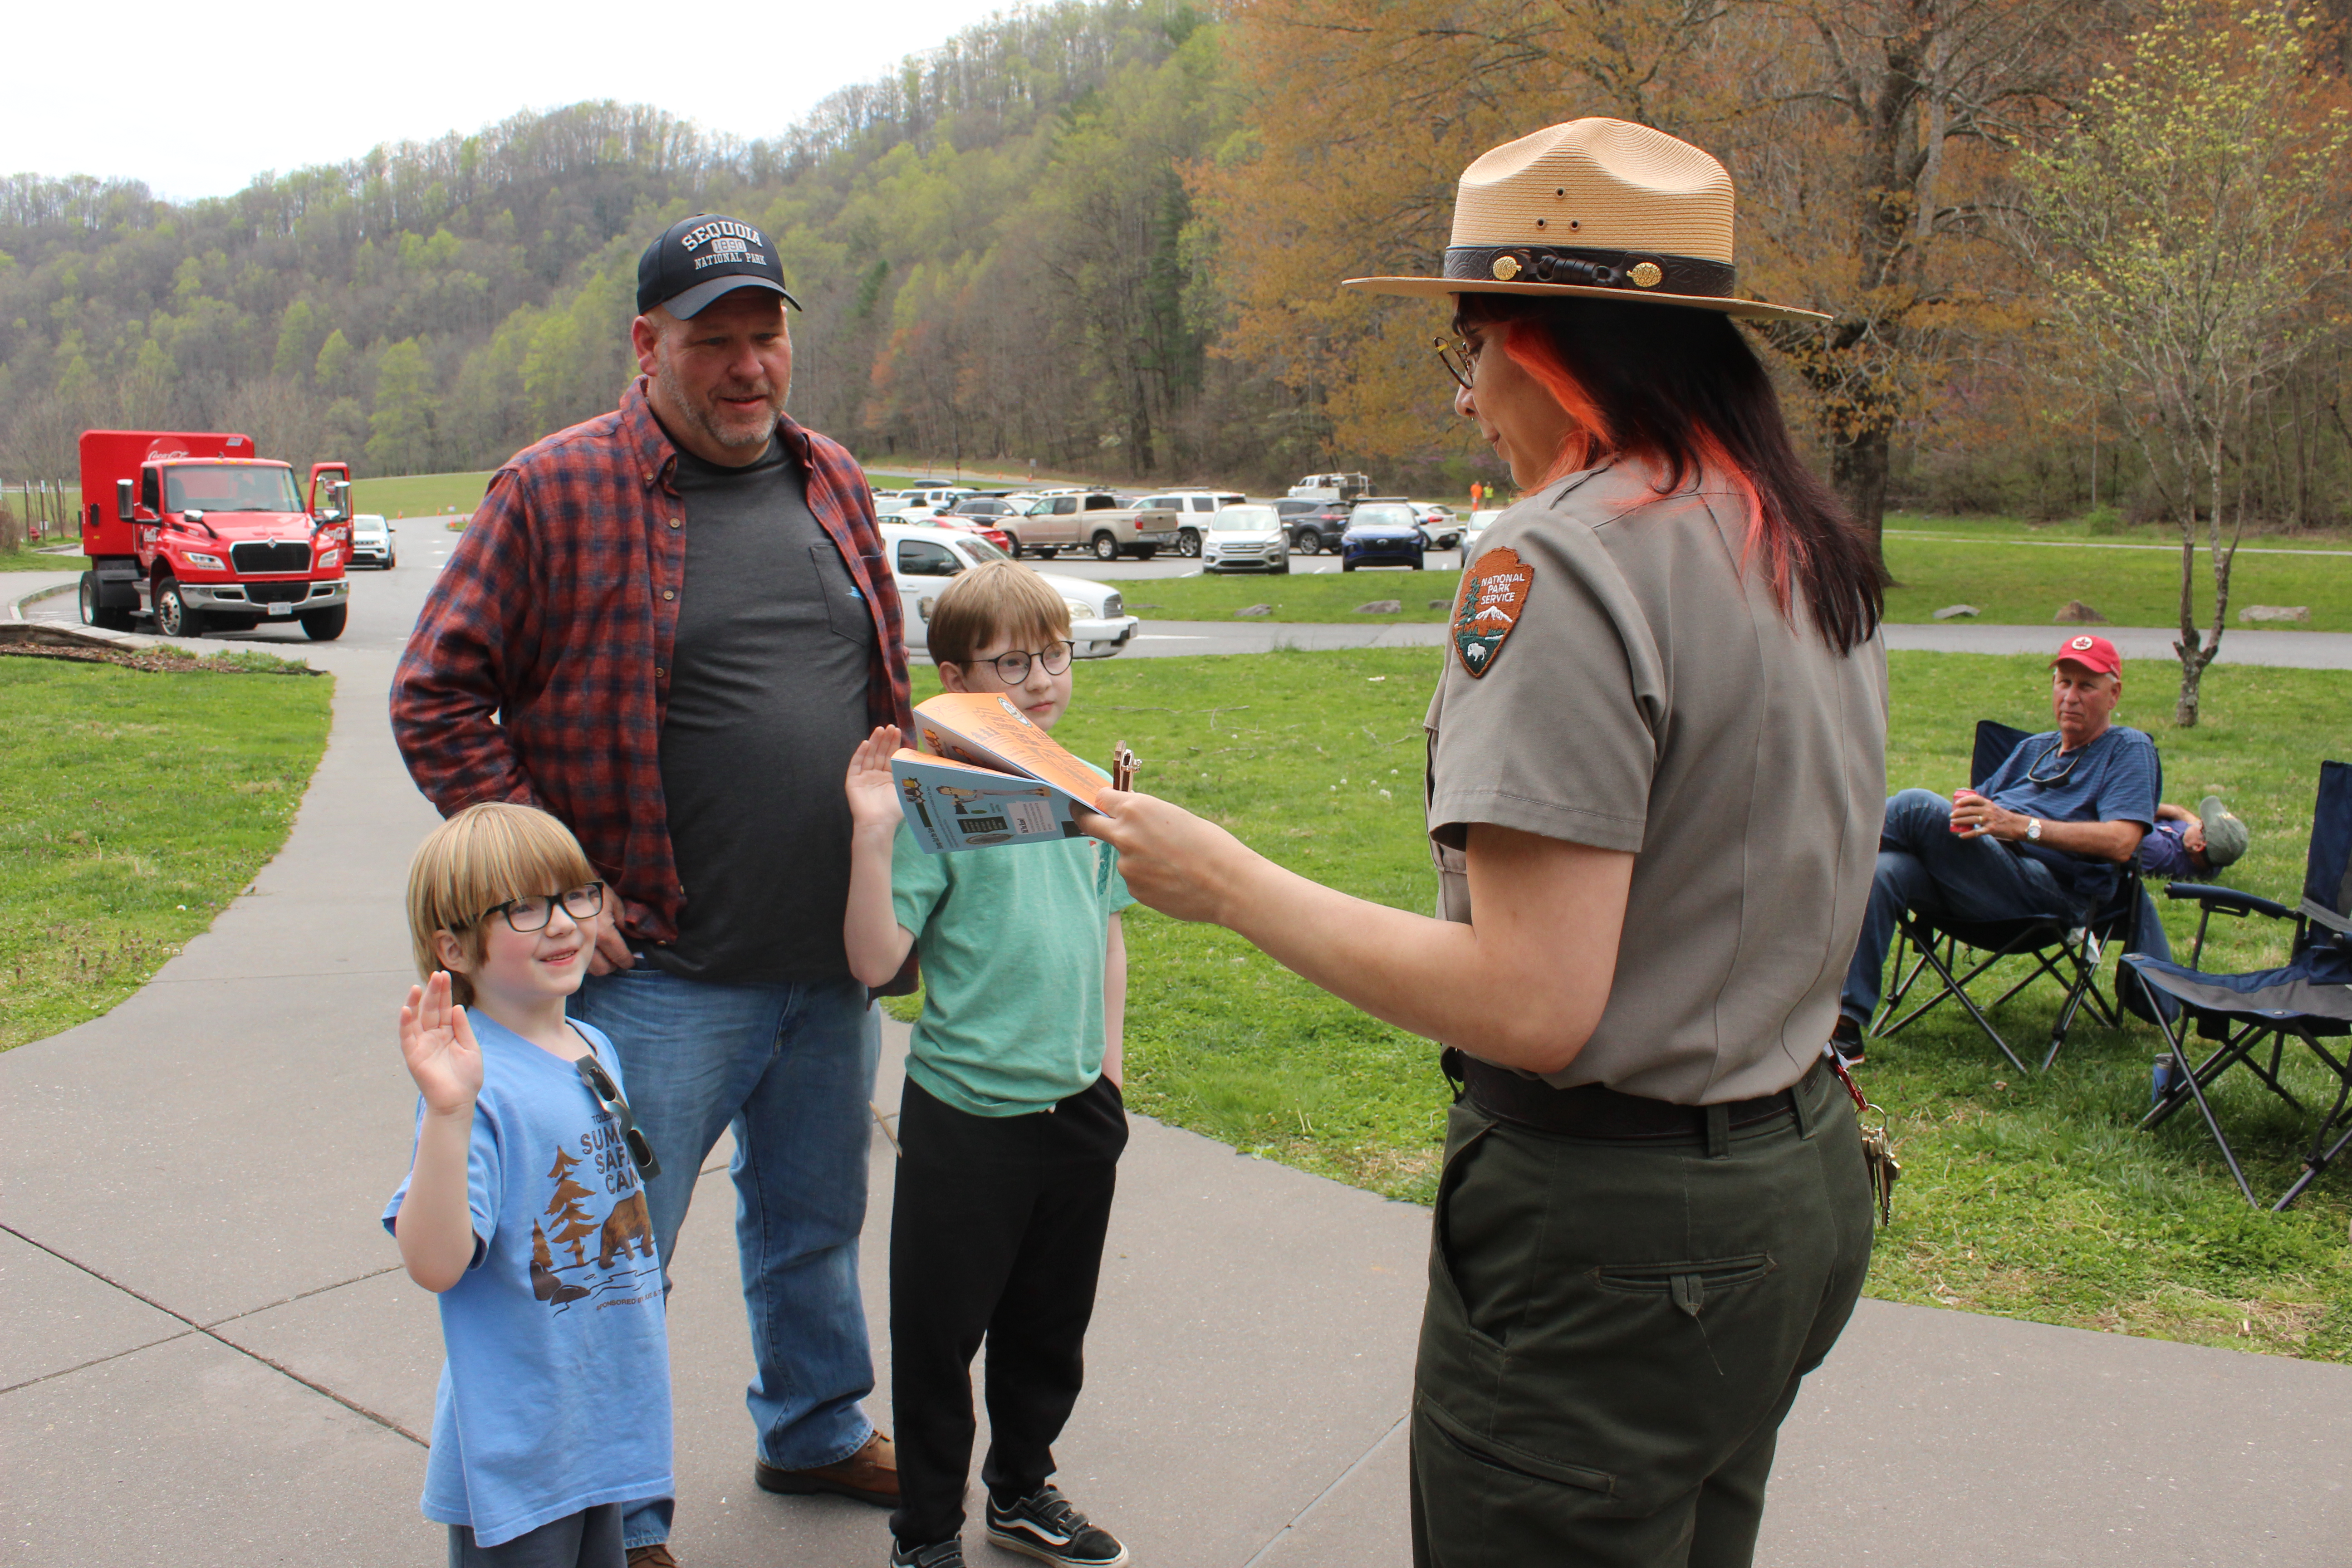 Park visitor Troy Guckiean’s sons are sworn into the Great Smoky Mountain National Park’s Junior Ranger program by park ranger Julie Flores. The boys, with hands raised, promised to only look at the eclipse using safe practices and protective eyewear.